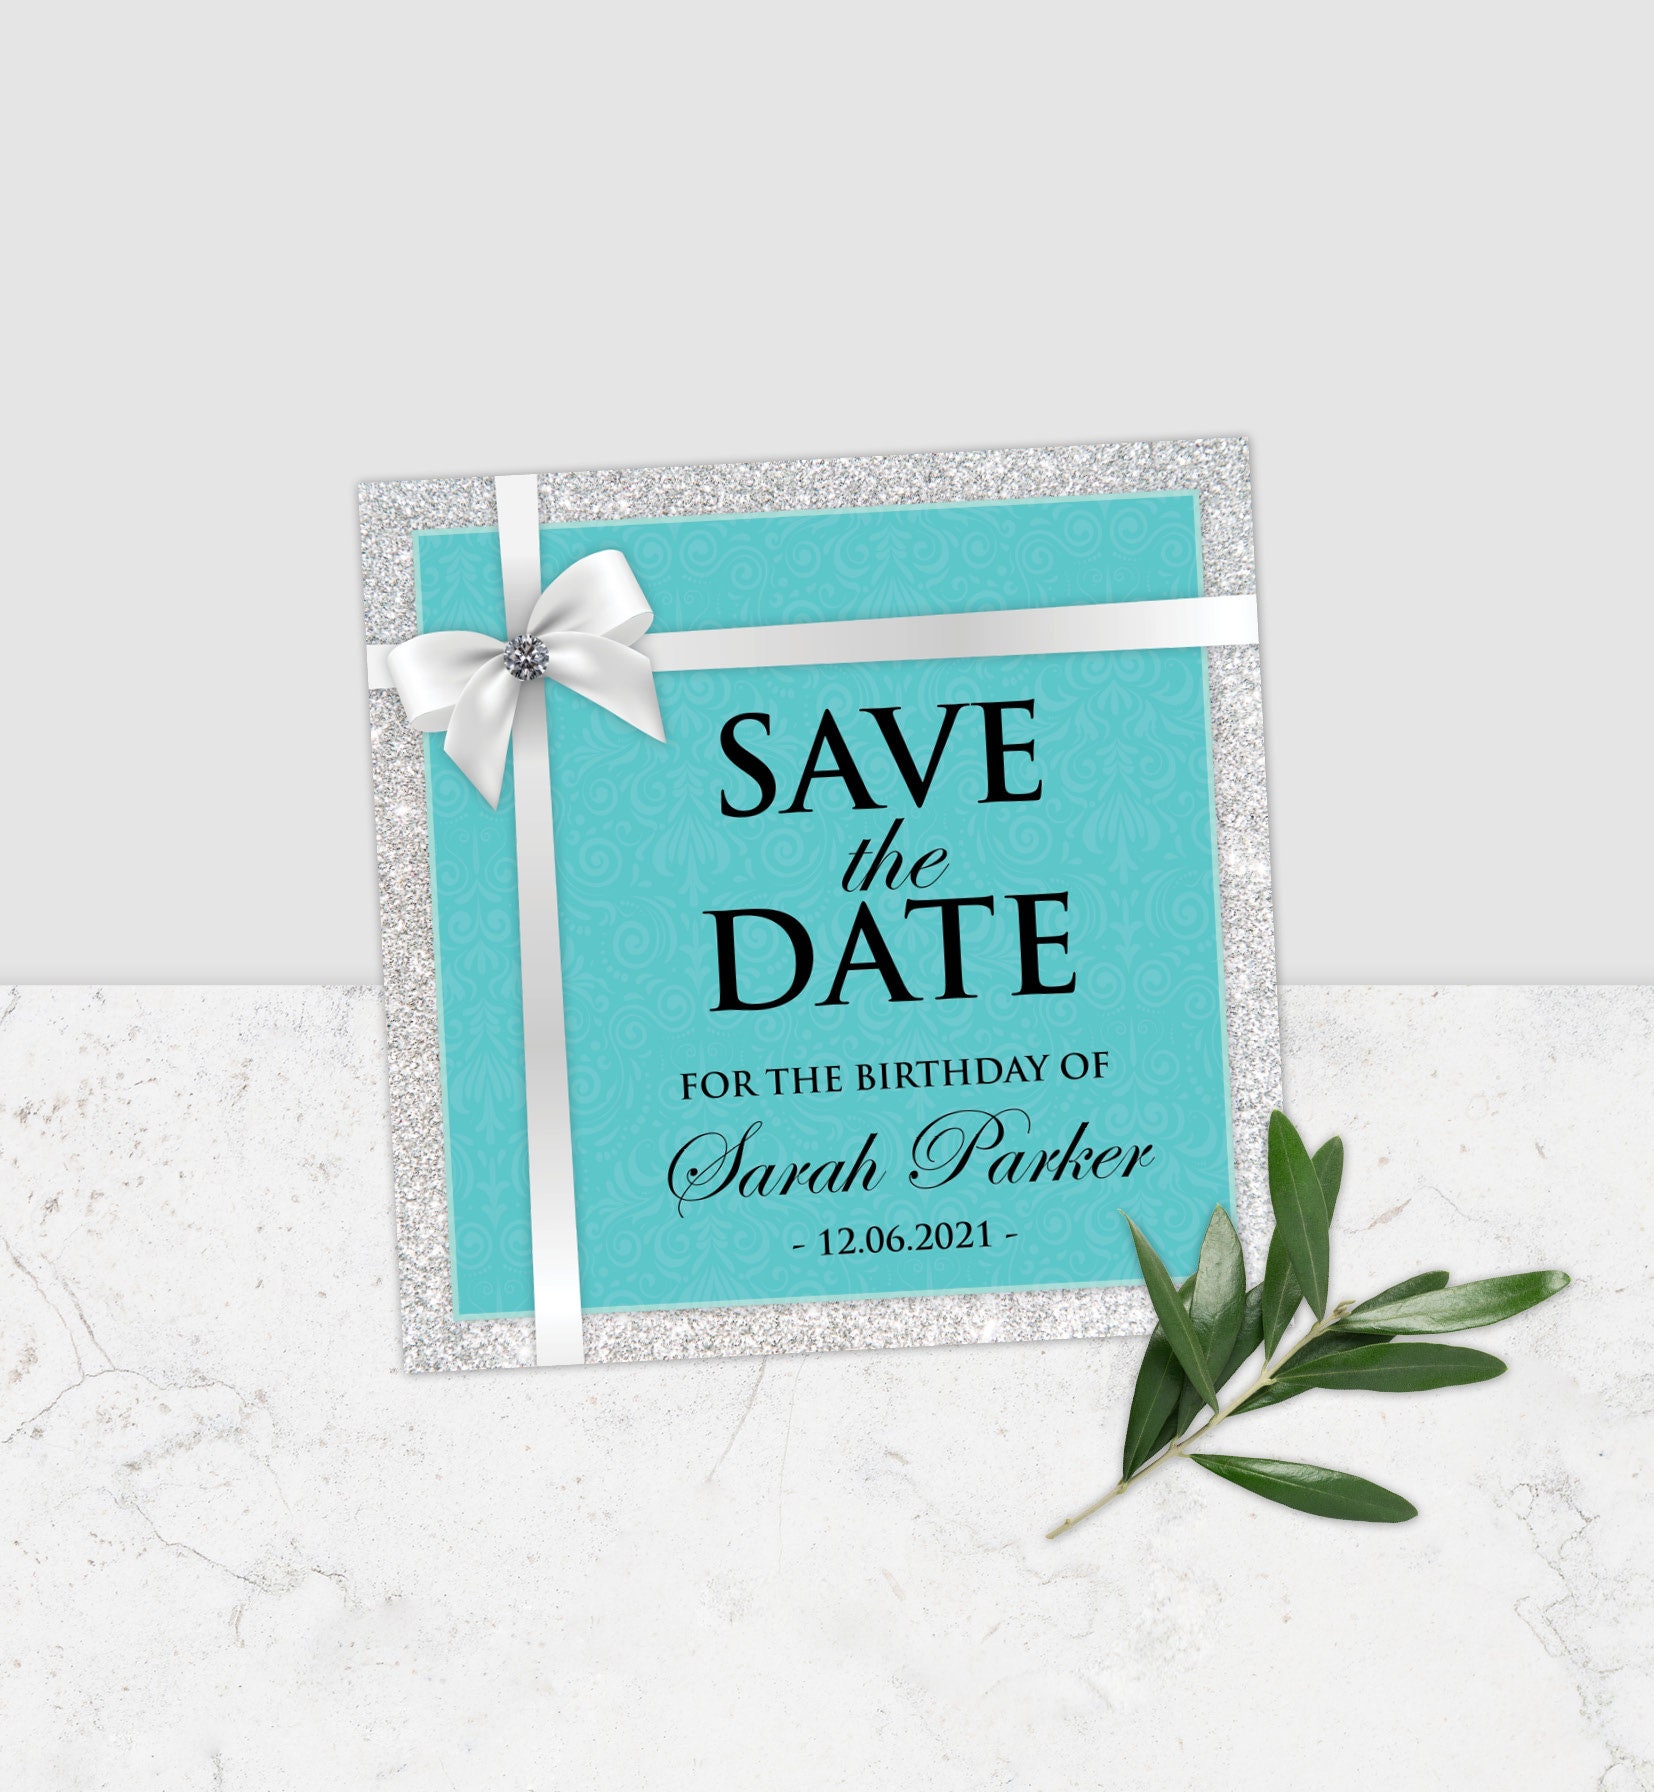 Aqua Mist Beach Wedding Save the Date cards with teal and blue